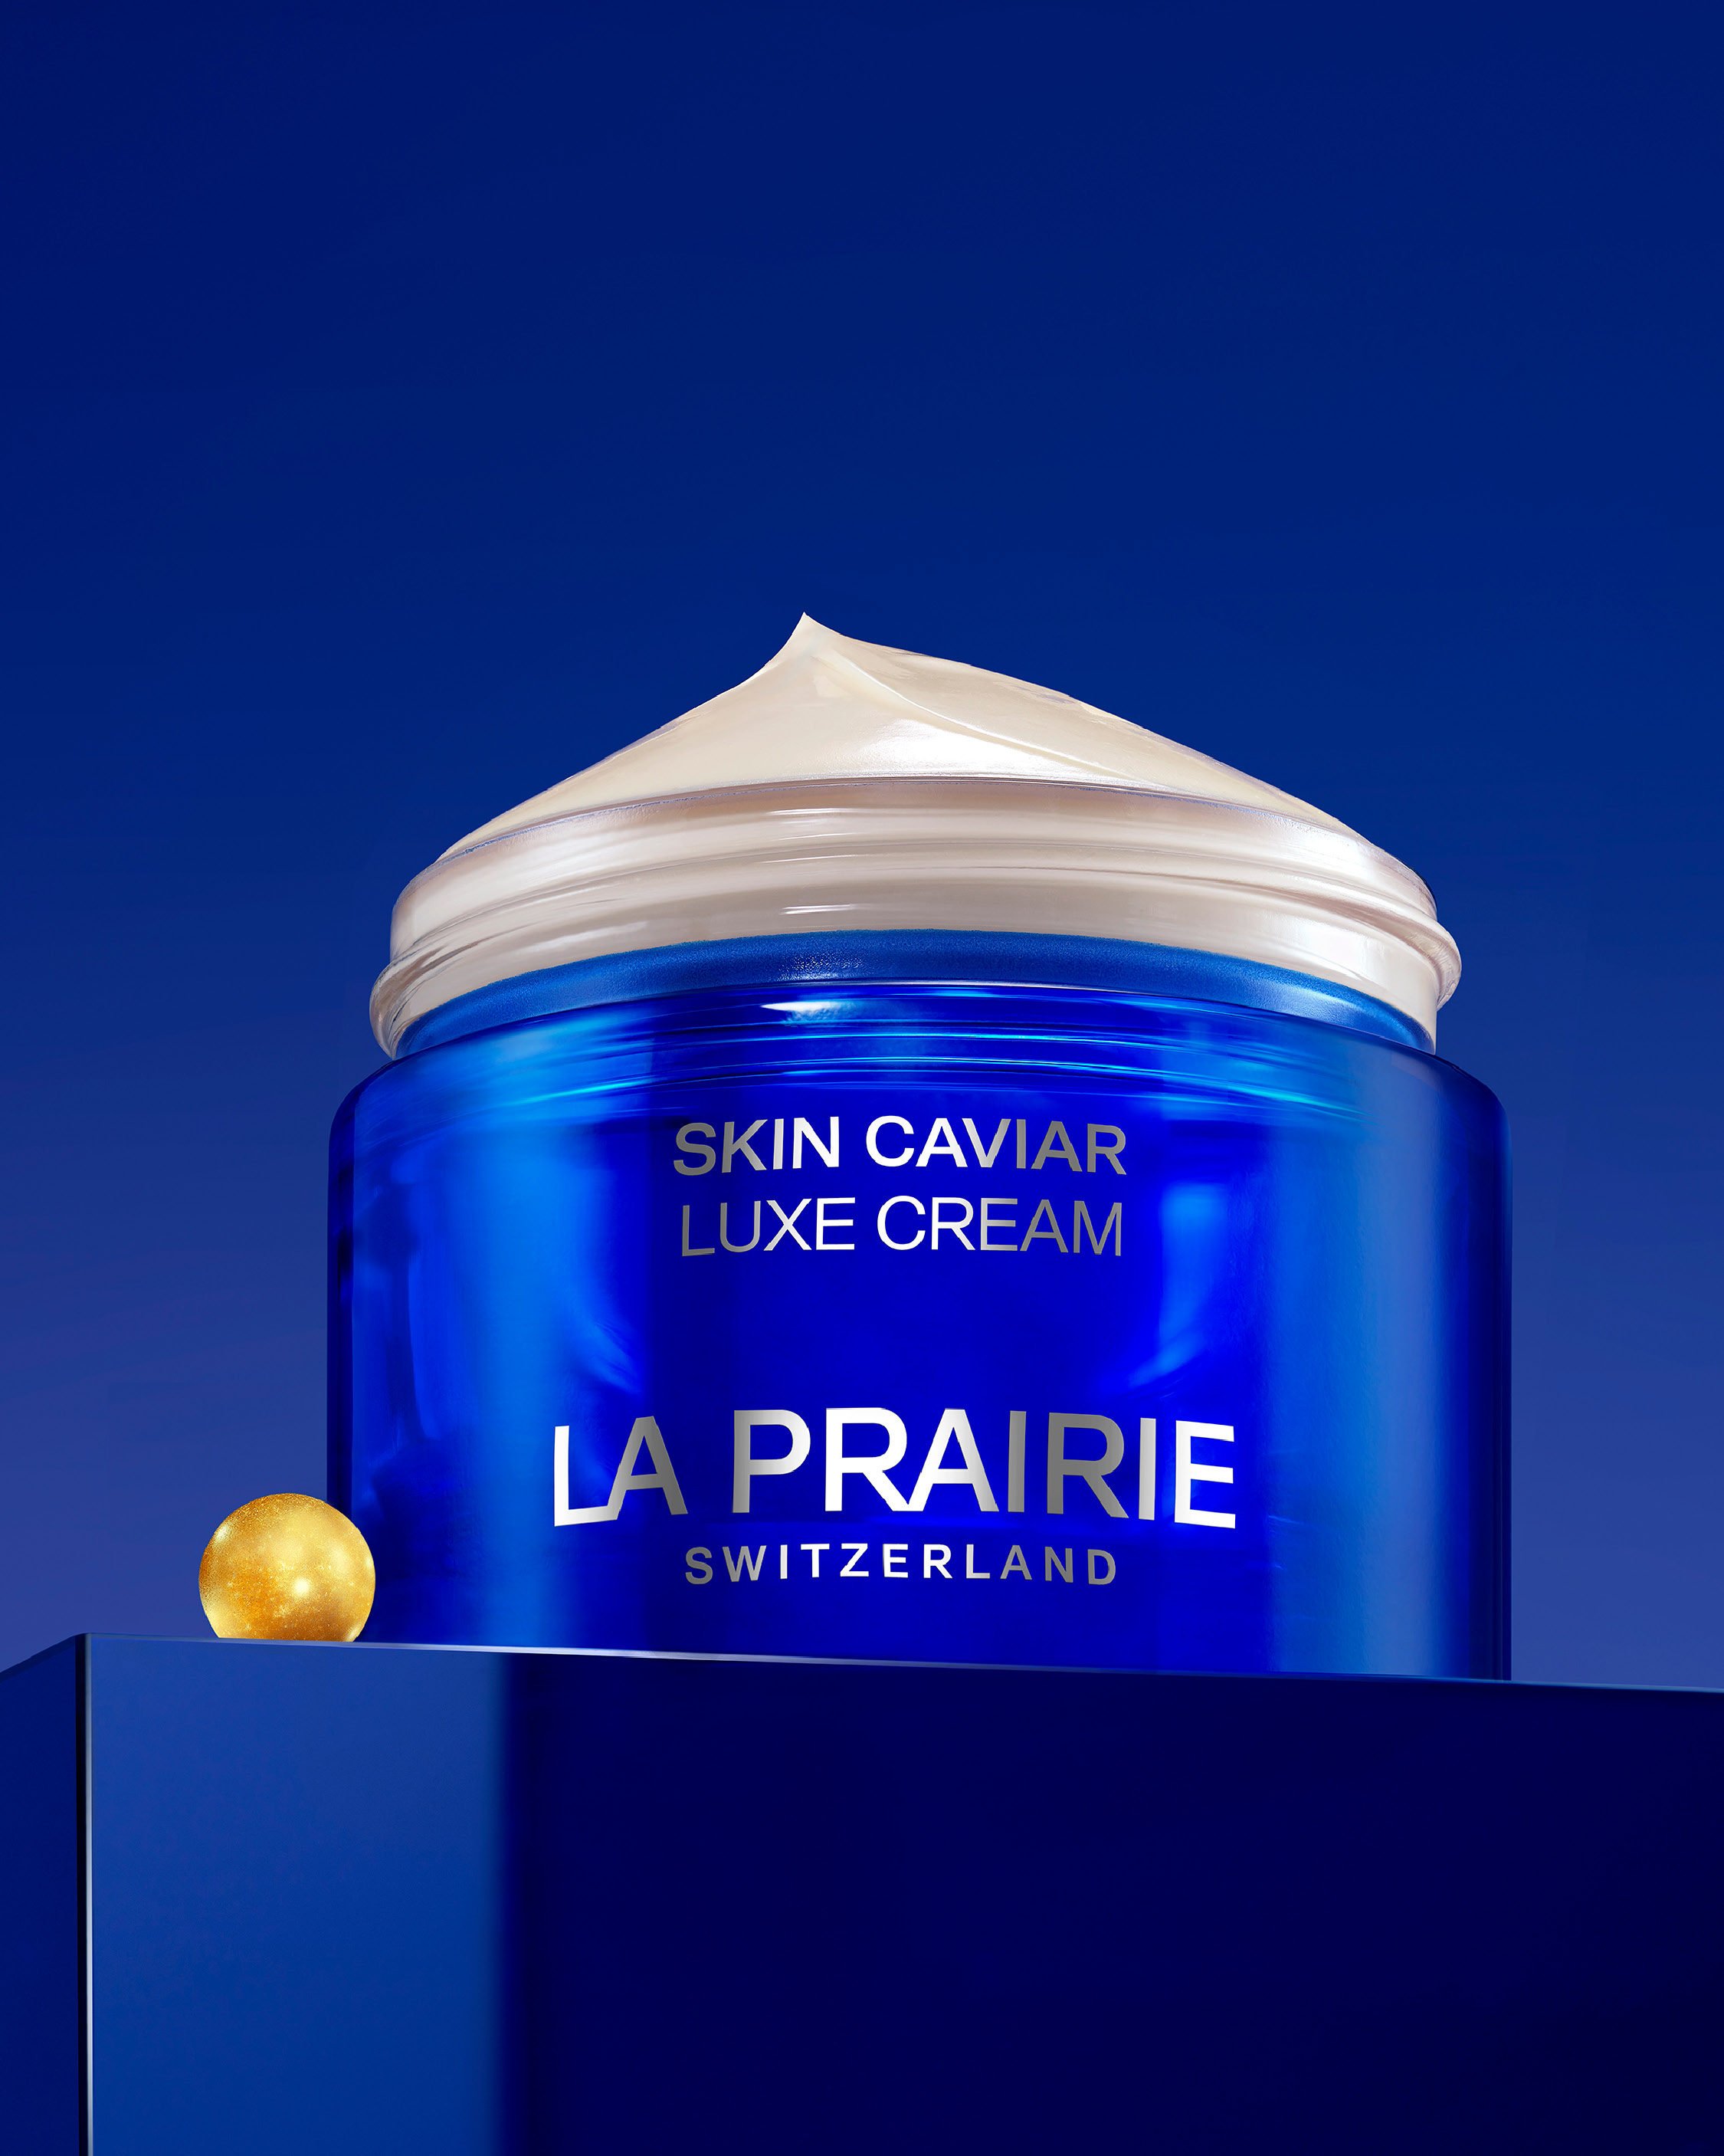 La Prairie’s Skin Caviar Luxe Cream harnesses the power of roe to reverse the signs of ageing from within. Photos: Handout